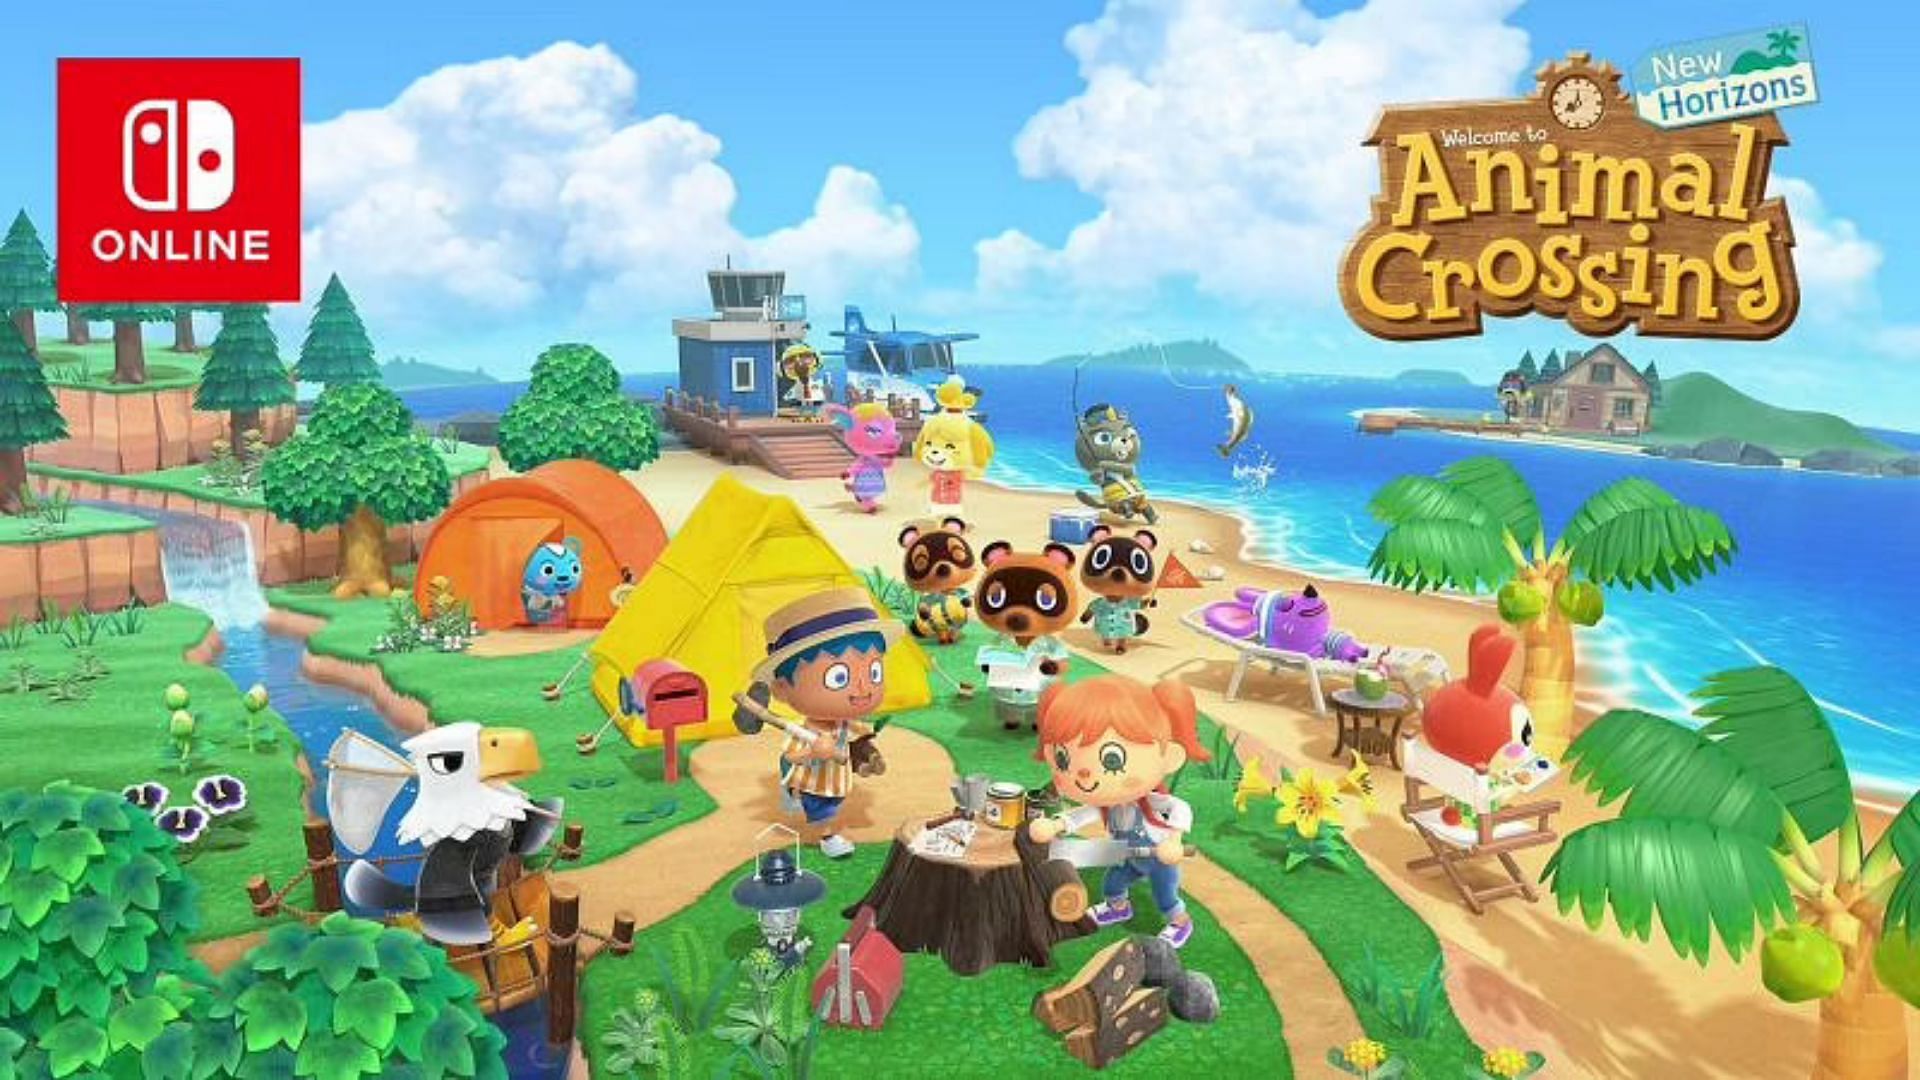 Speculations about future Animal Crossing: New Horizons updates discussed (Image via Sportskeeda)